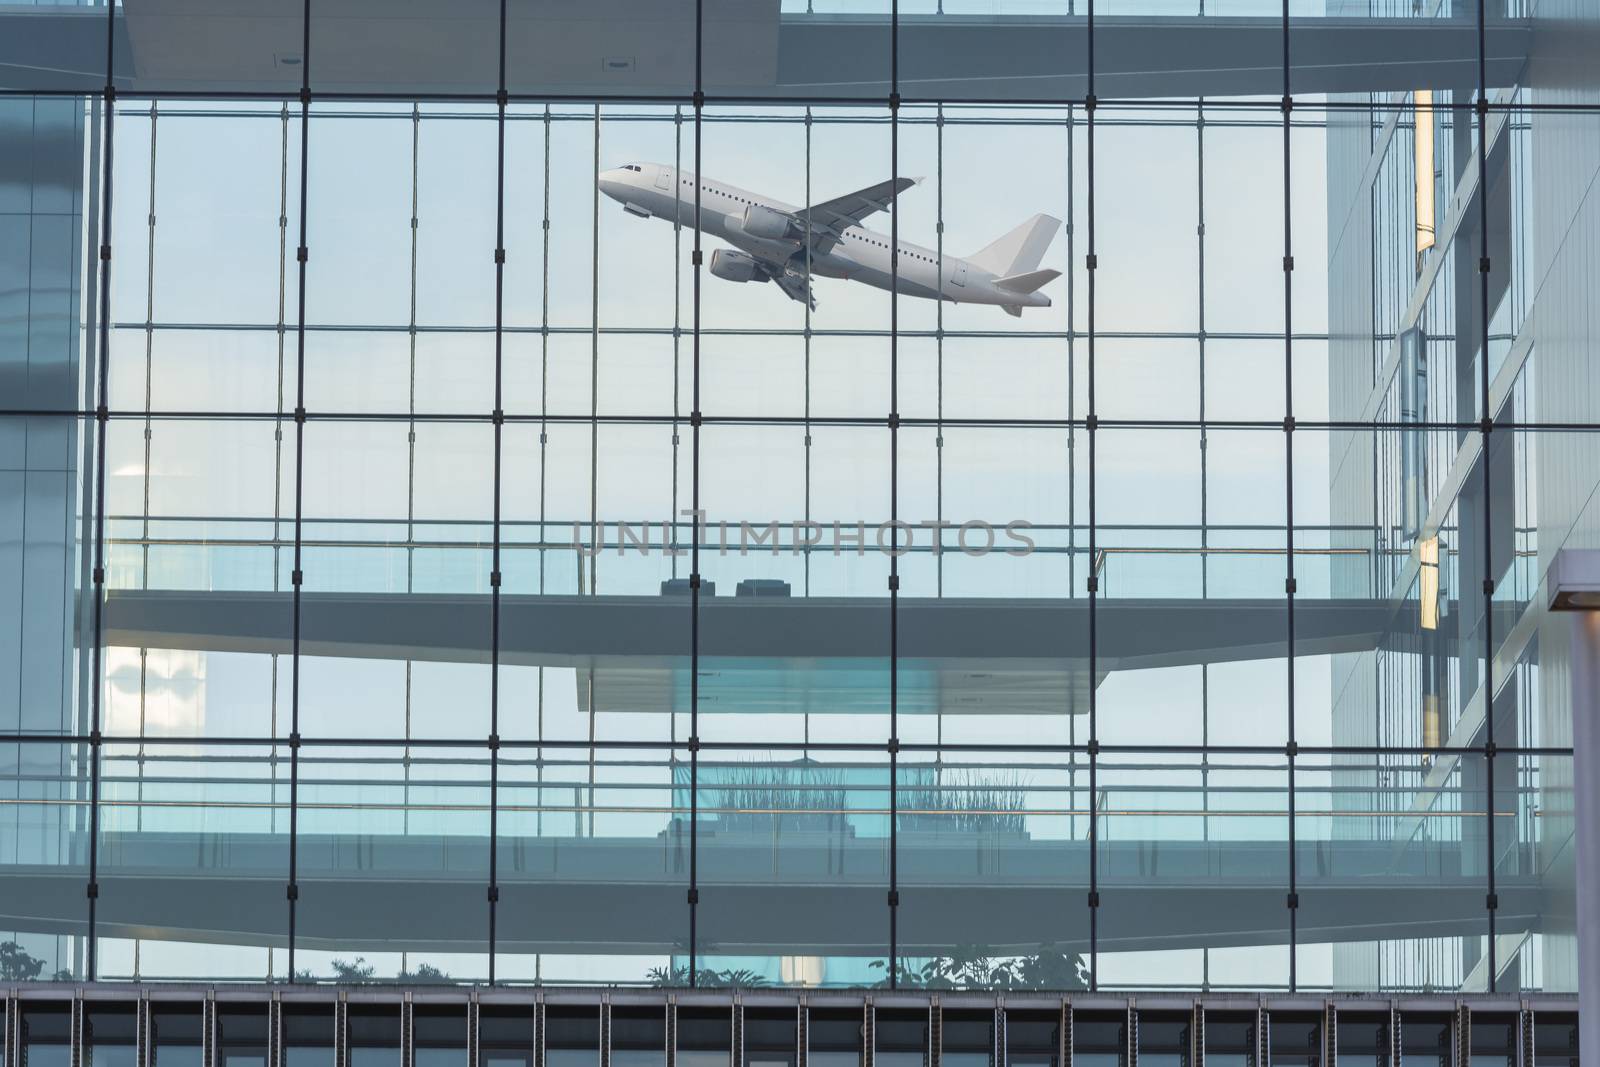 Modern office building with glass facade in the background a plane when you start.